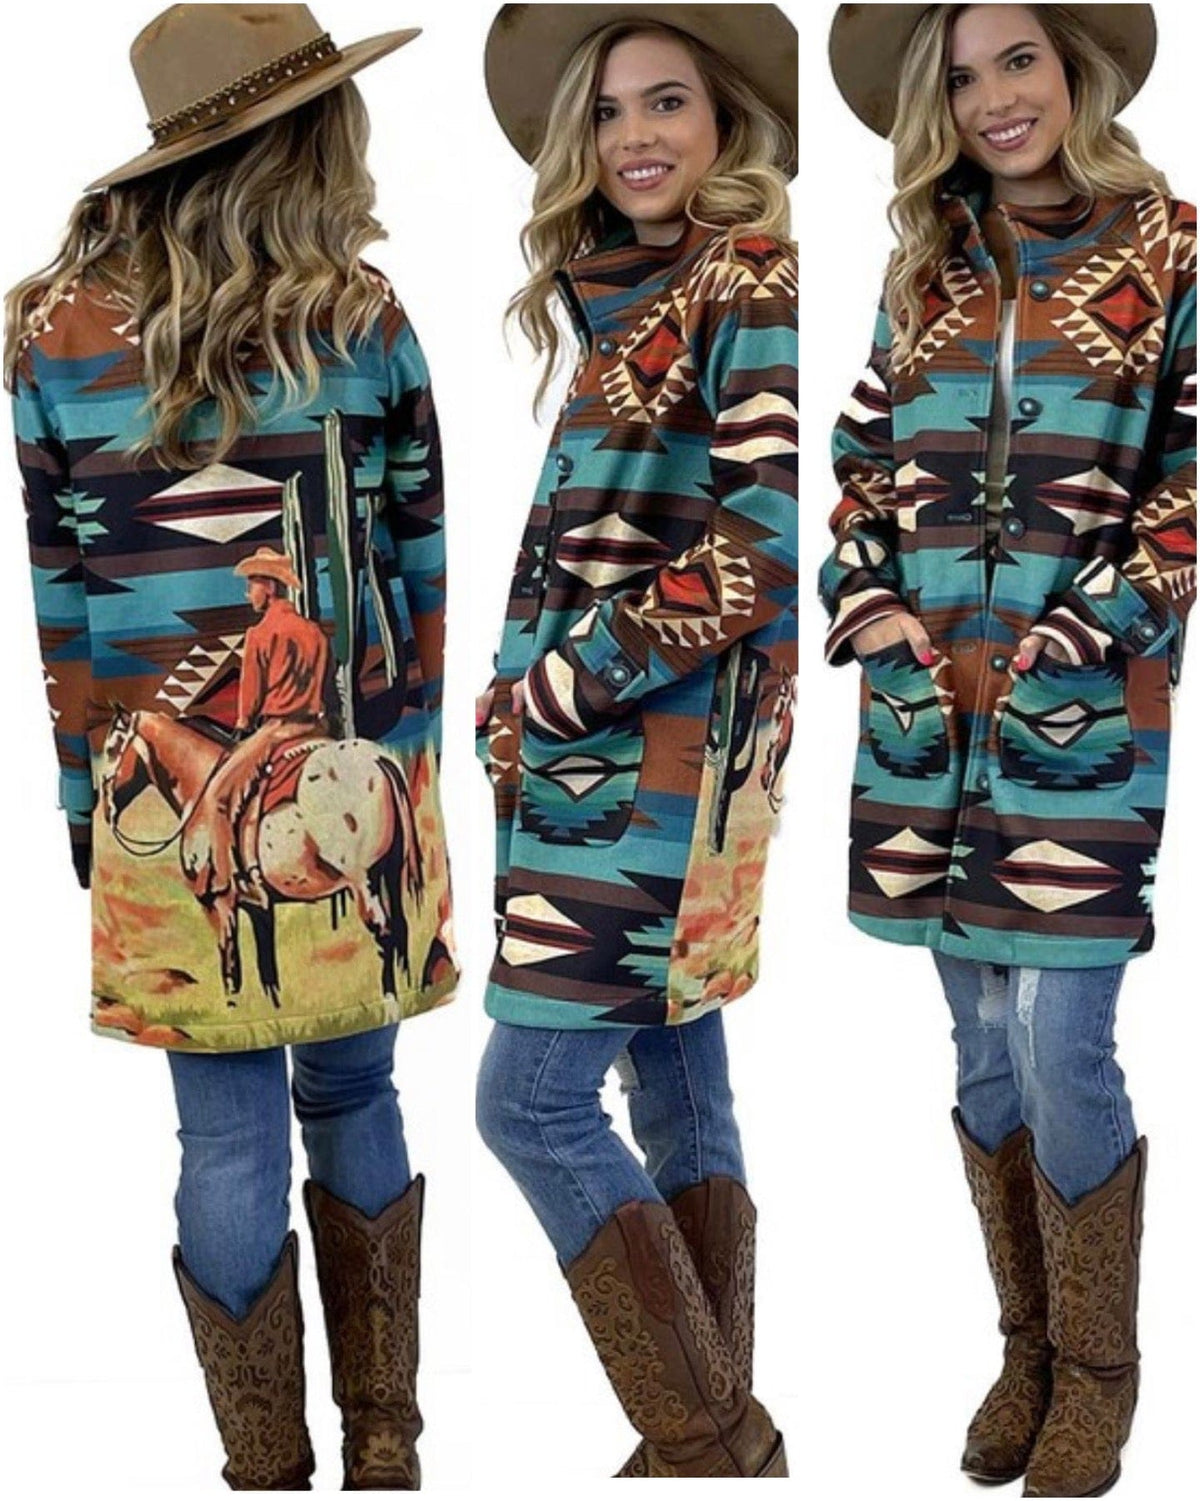 Turquoise Cowgirl Tell it like it is JACKET Southwest Bedazzle clothing